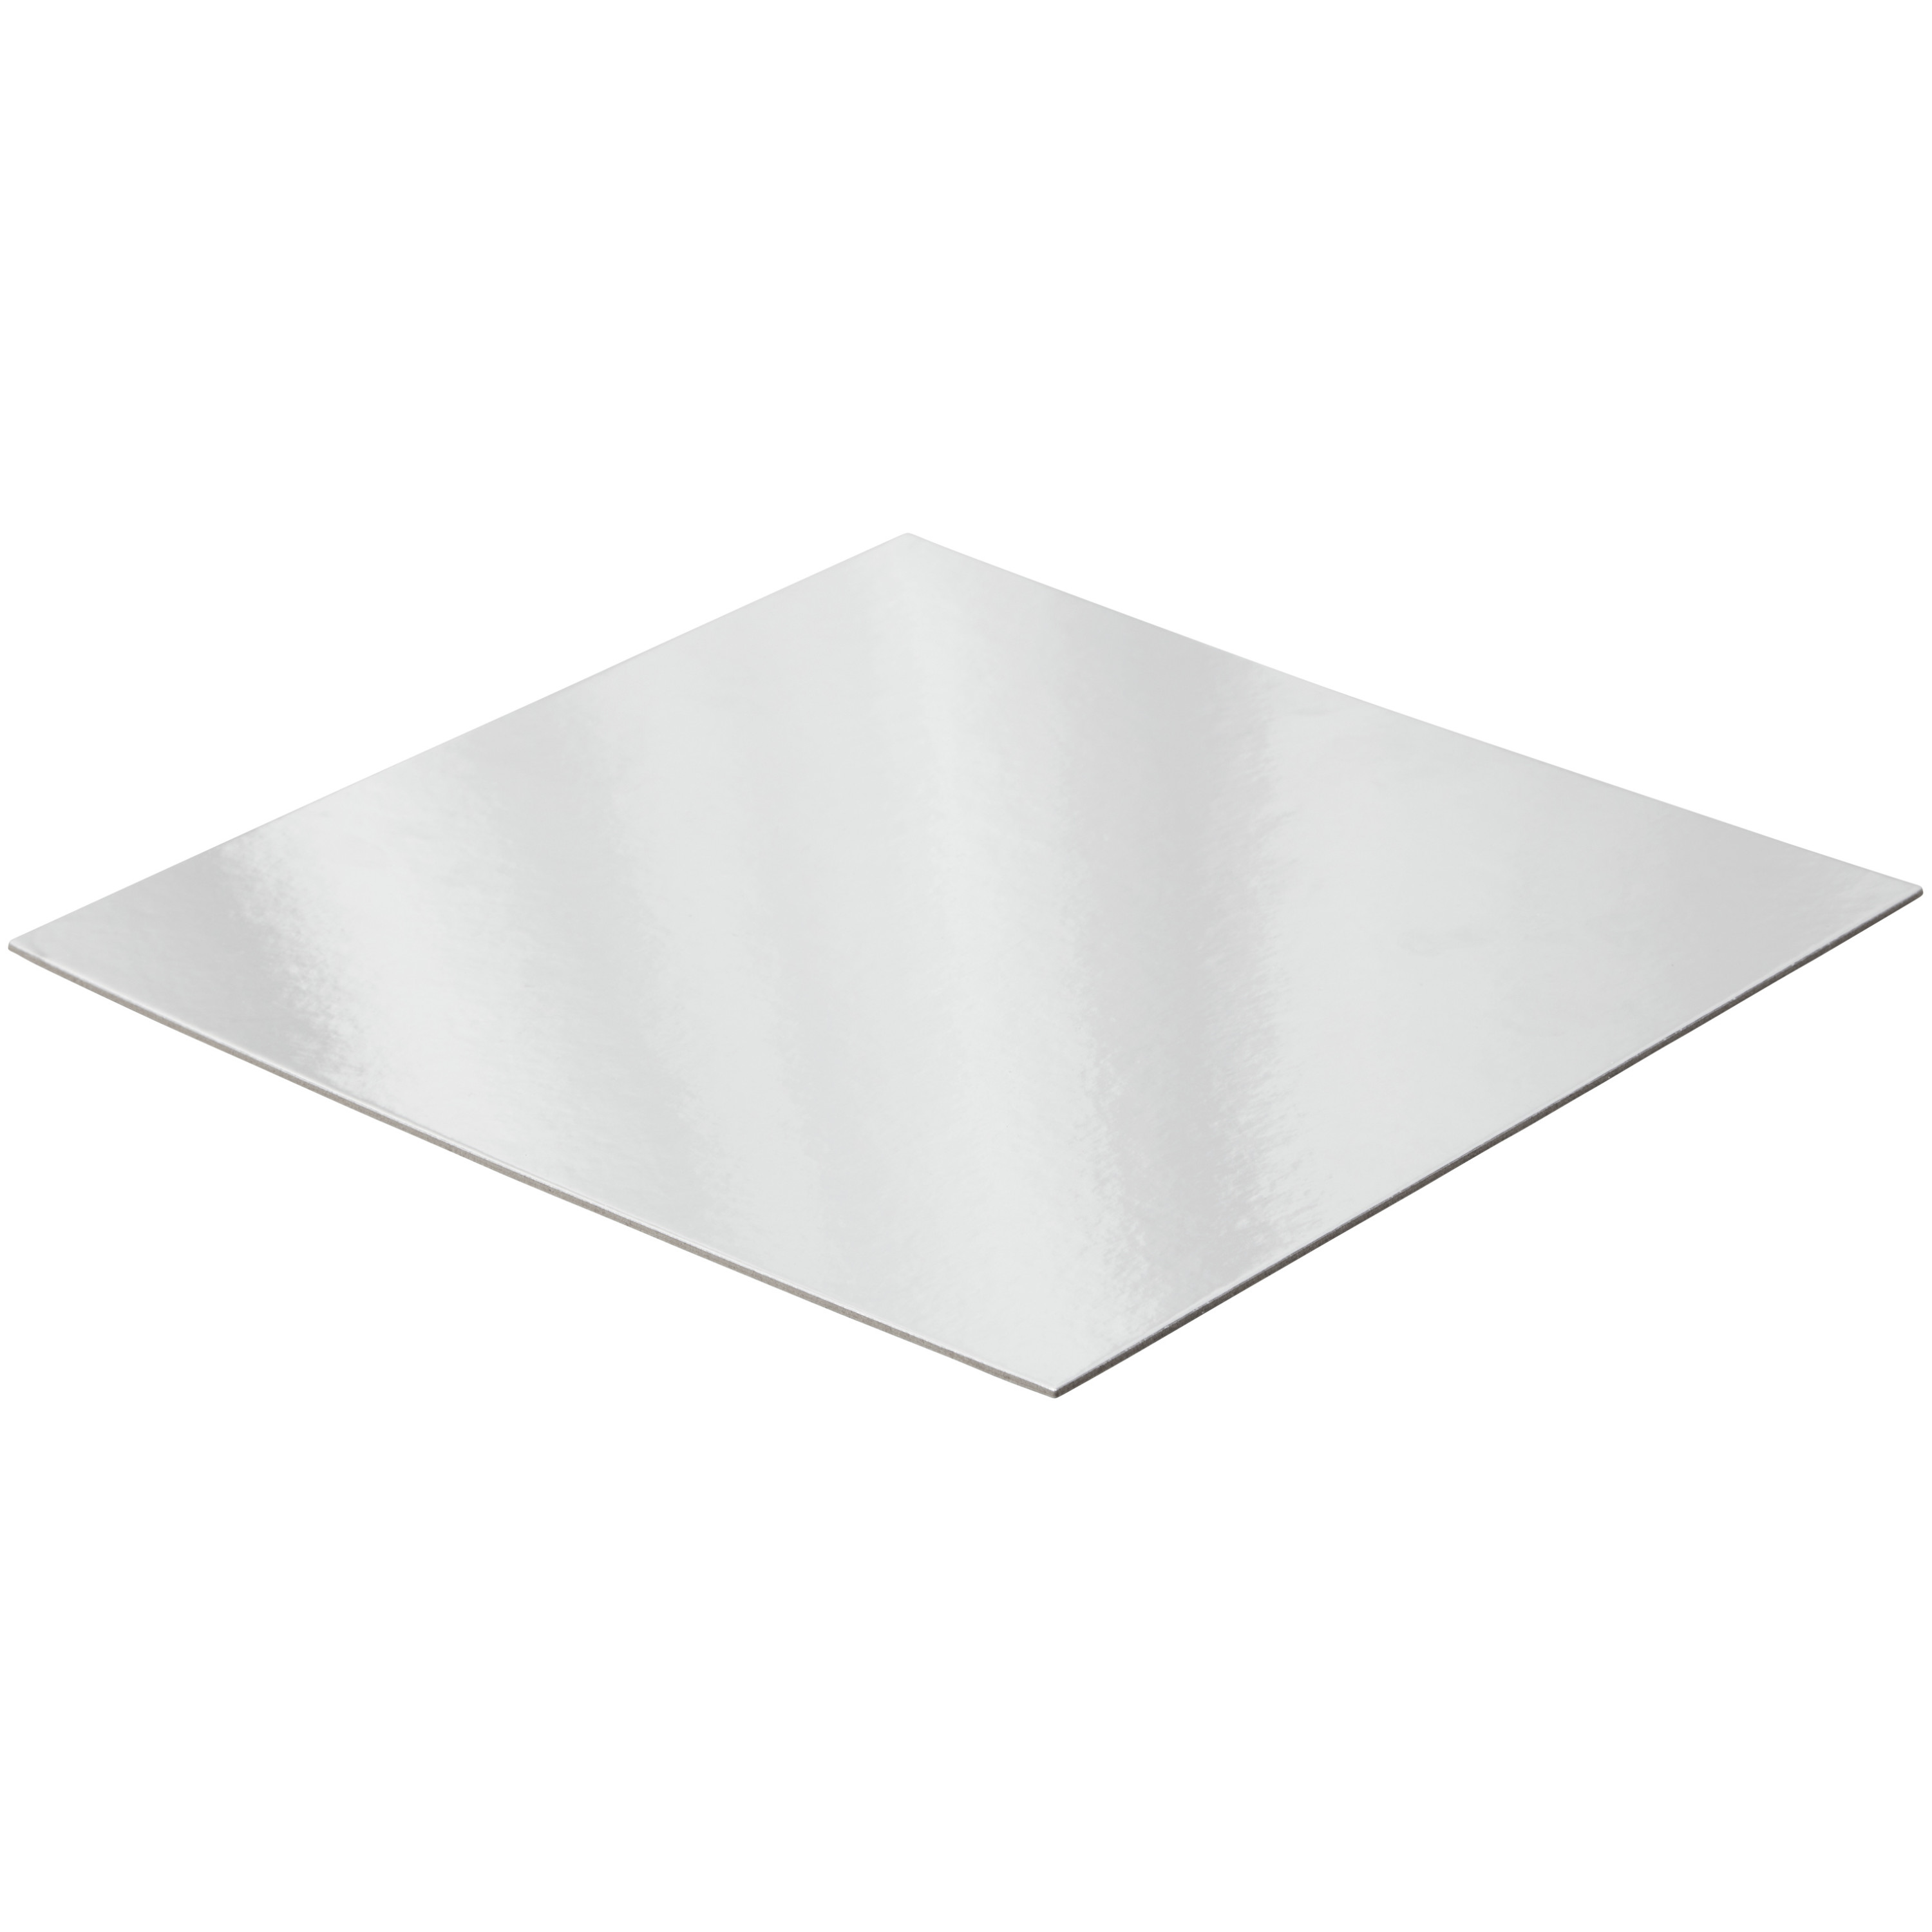 Wilton Silver 12-Inch Square Cake Platters, 5-Count - image 5 of 8